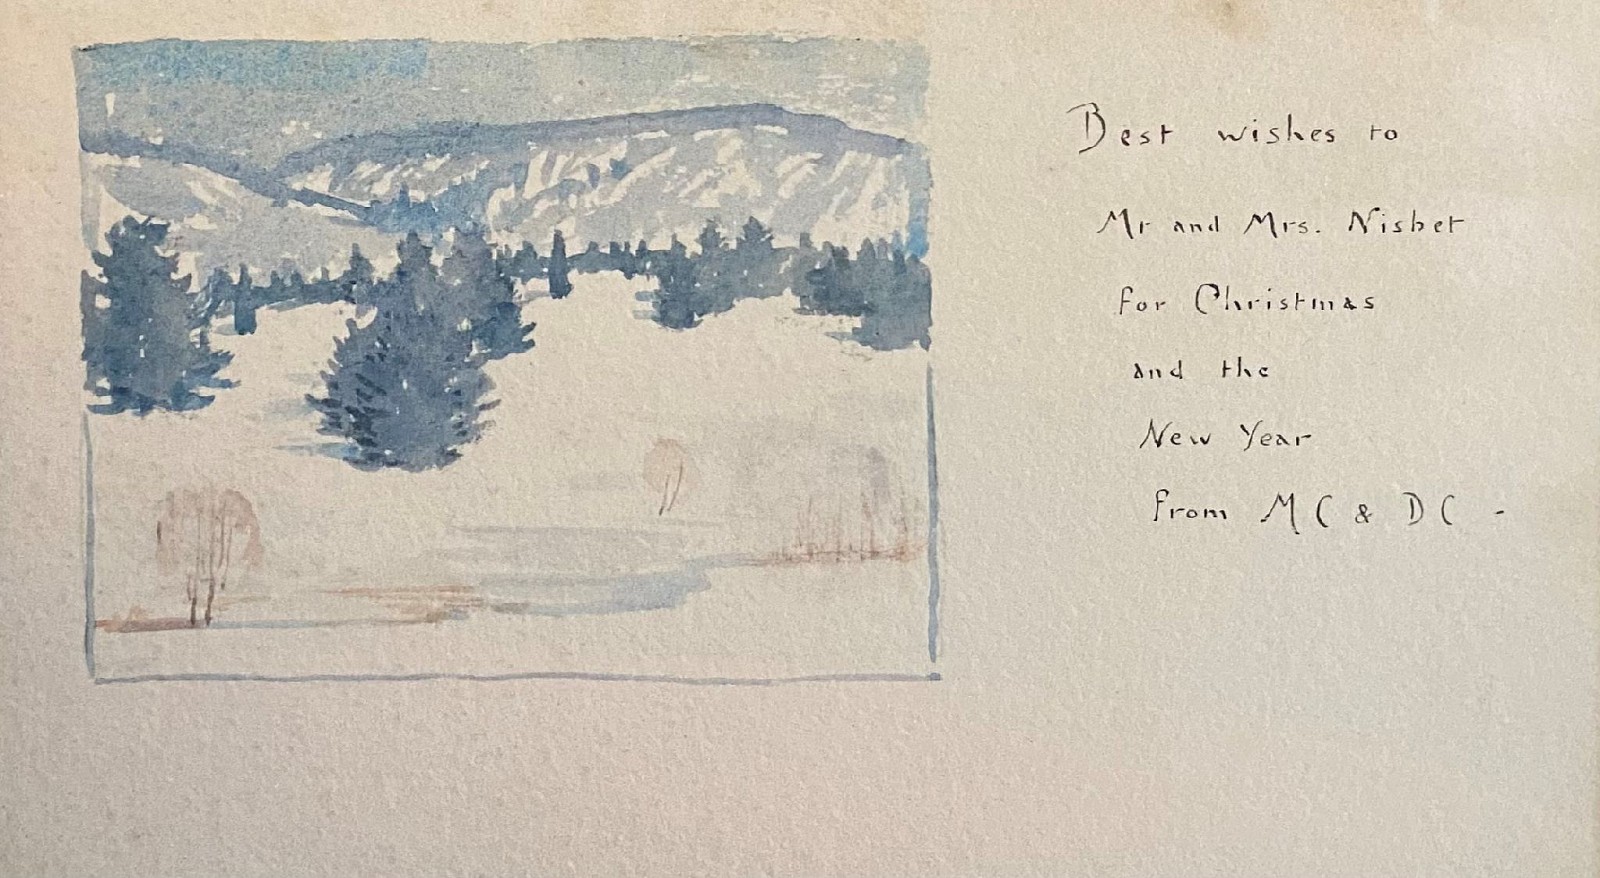 Dines Carlsen, Christmas Greeting
watercolor on paper, 3 1/4"" x 5 3/4"" sight size
EWP322.13
$350